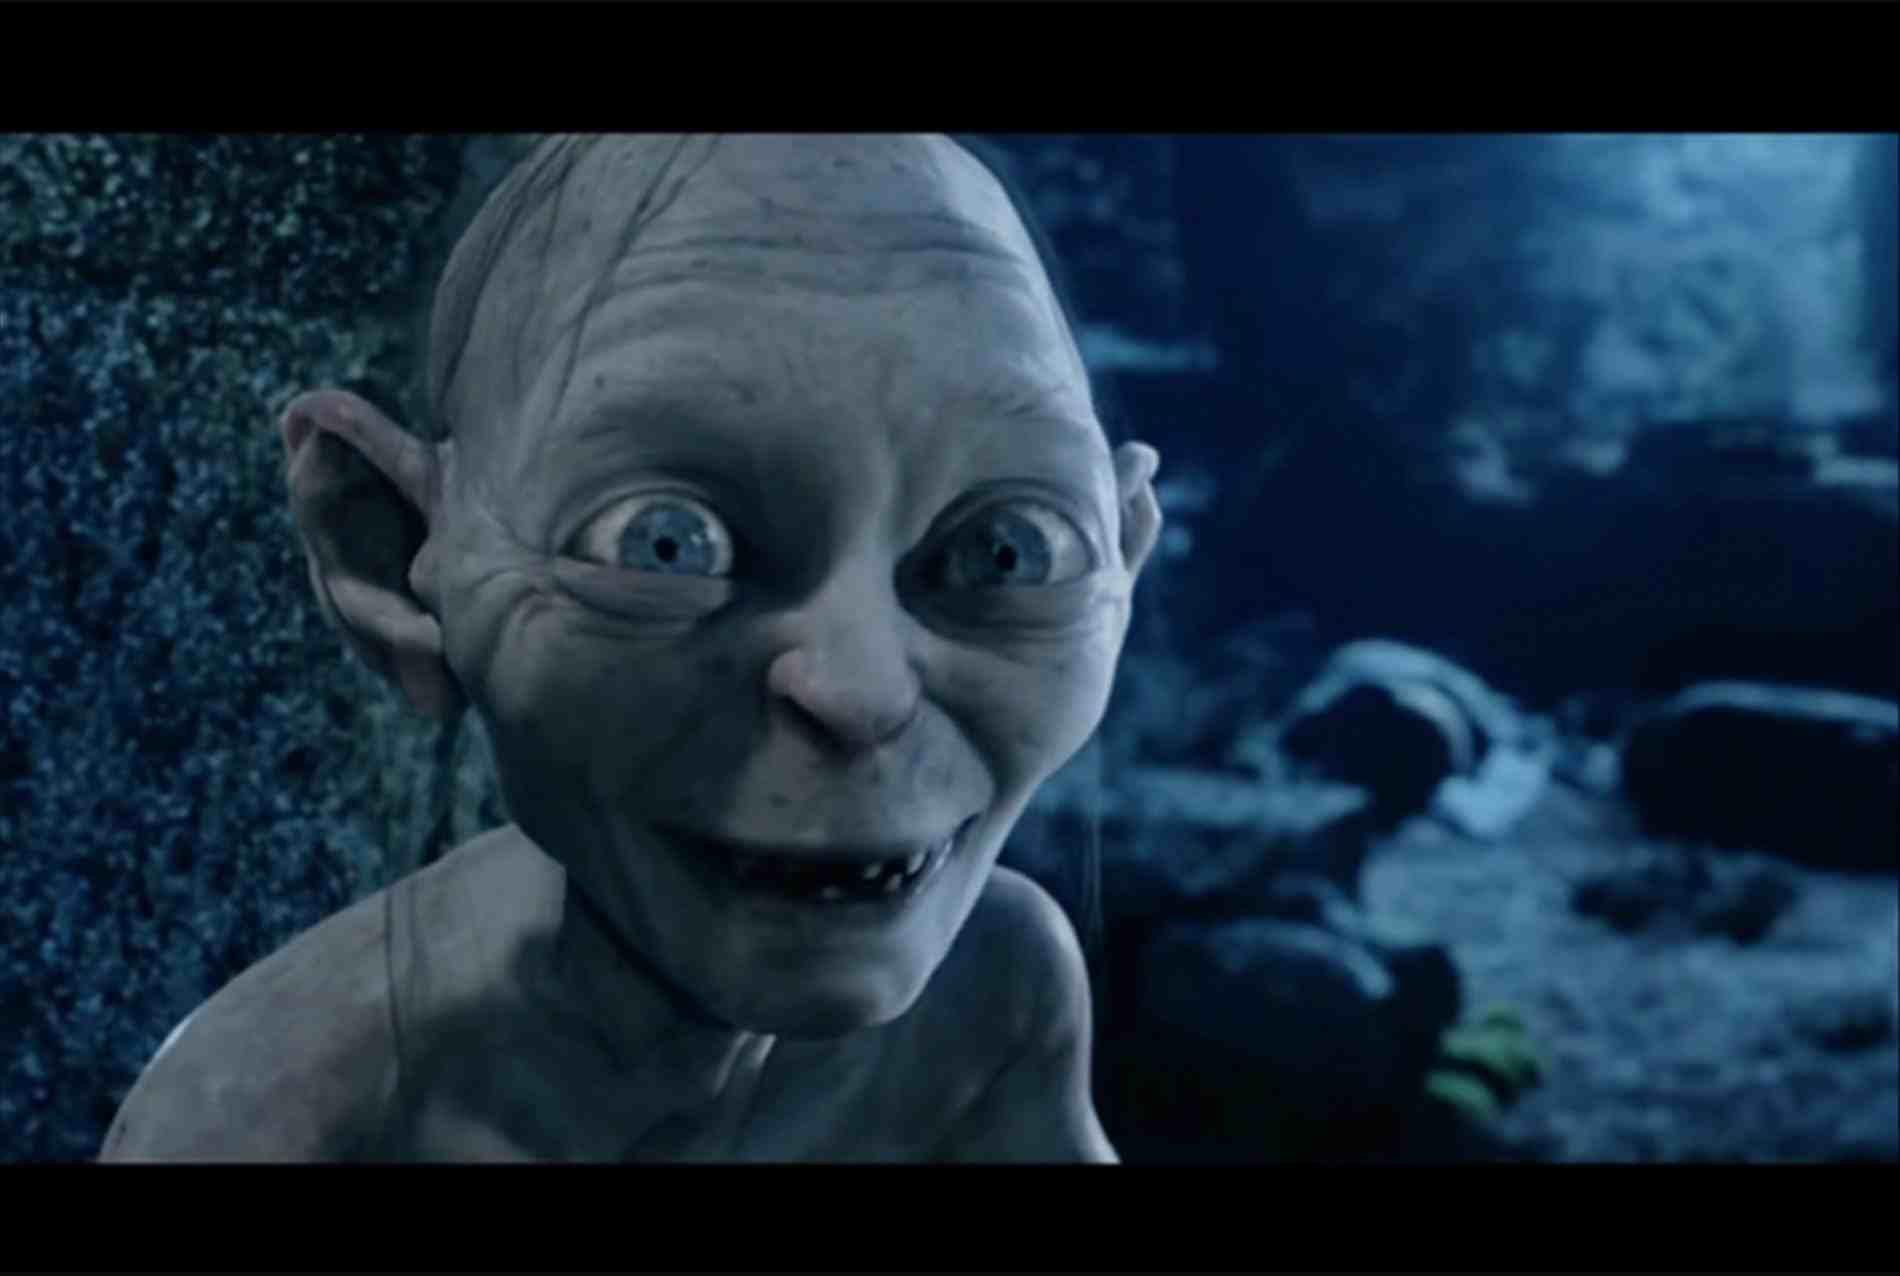 what did gollum call the ring in lord of the rings 1st movie